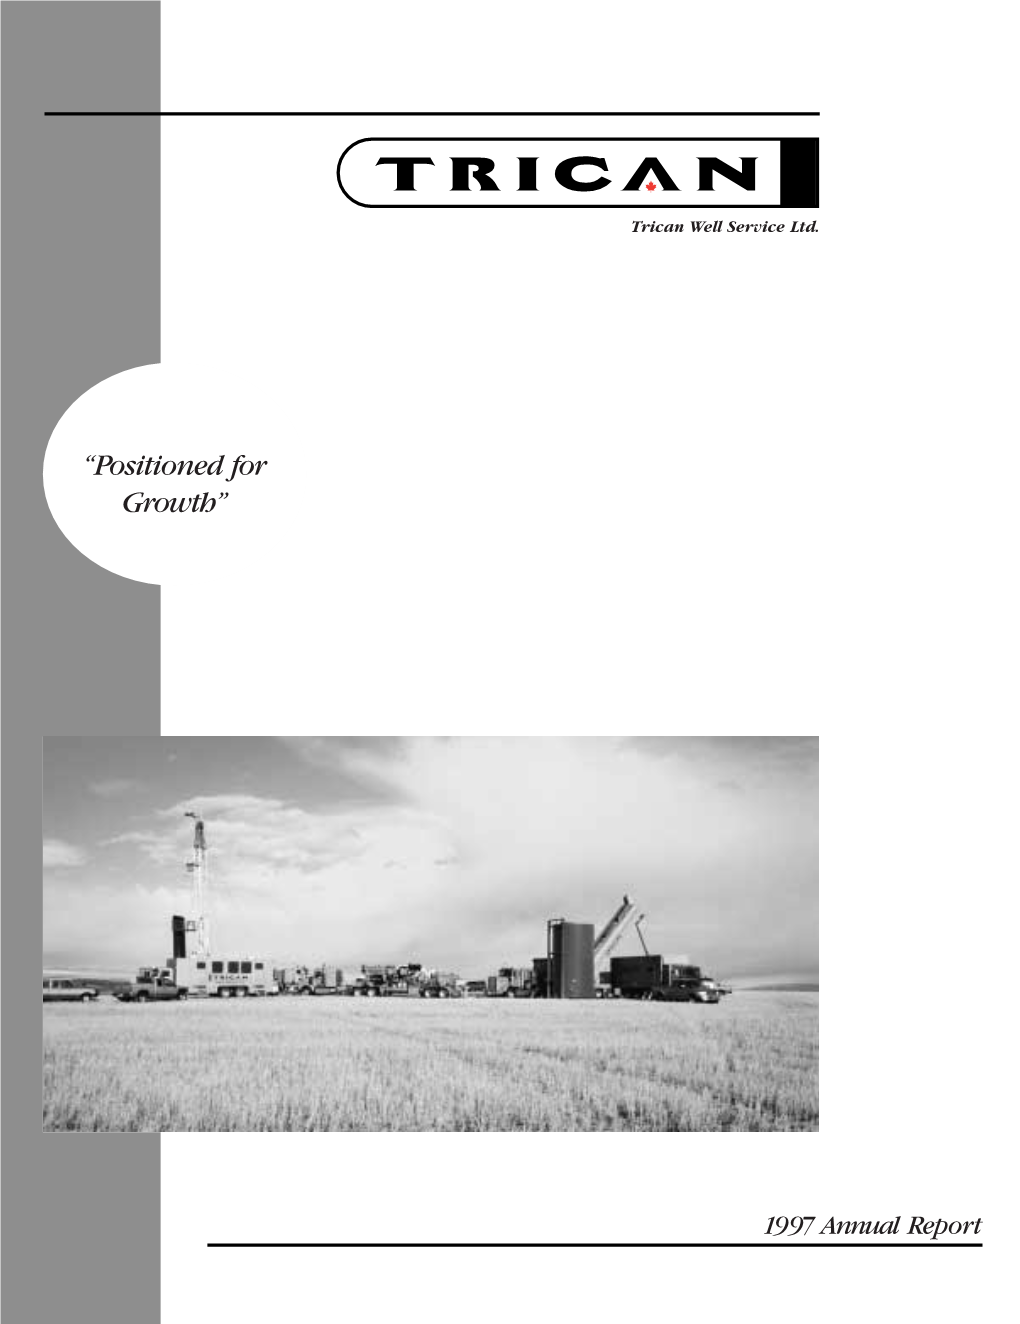 1997 Trican Well Service Annual Report